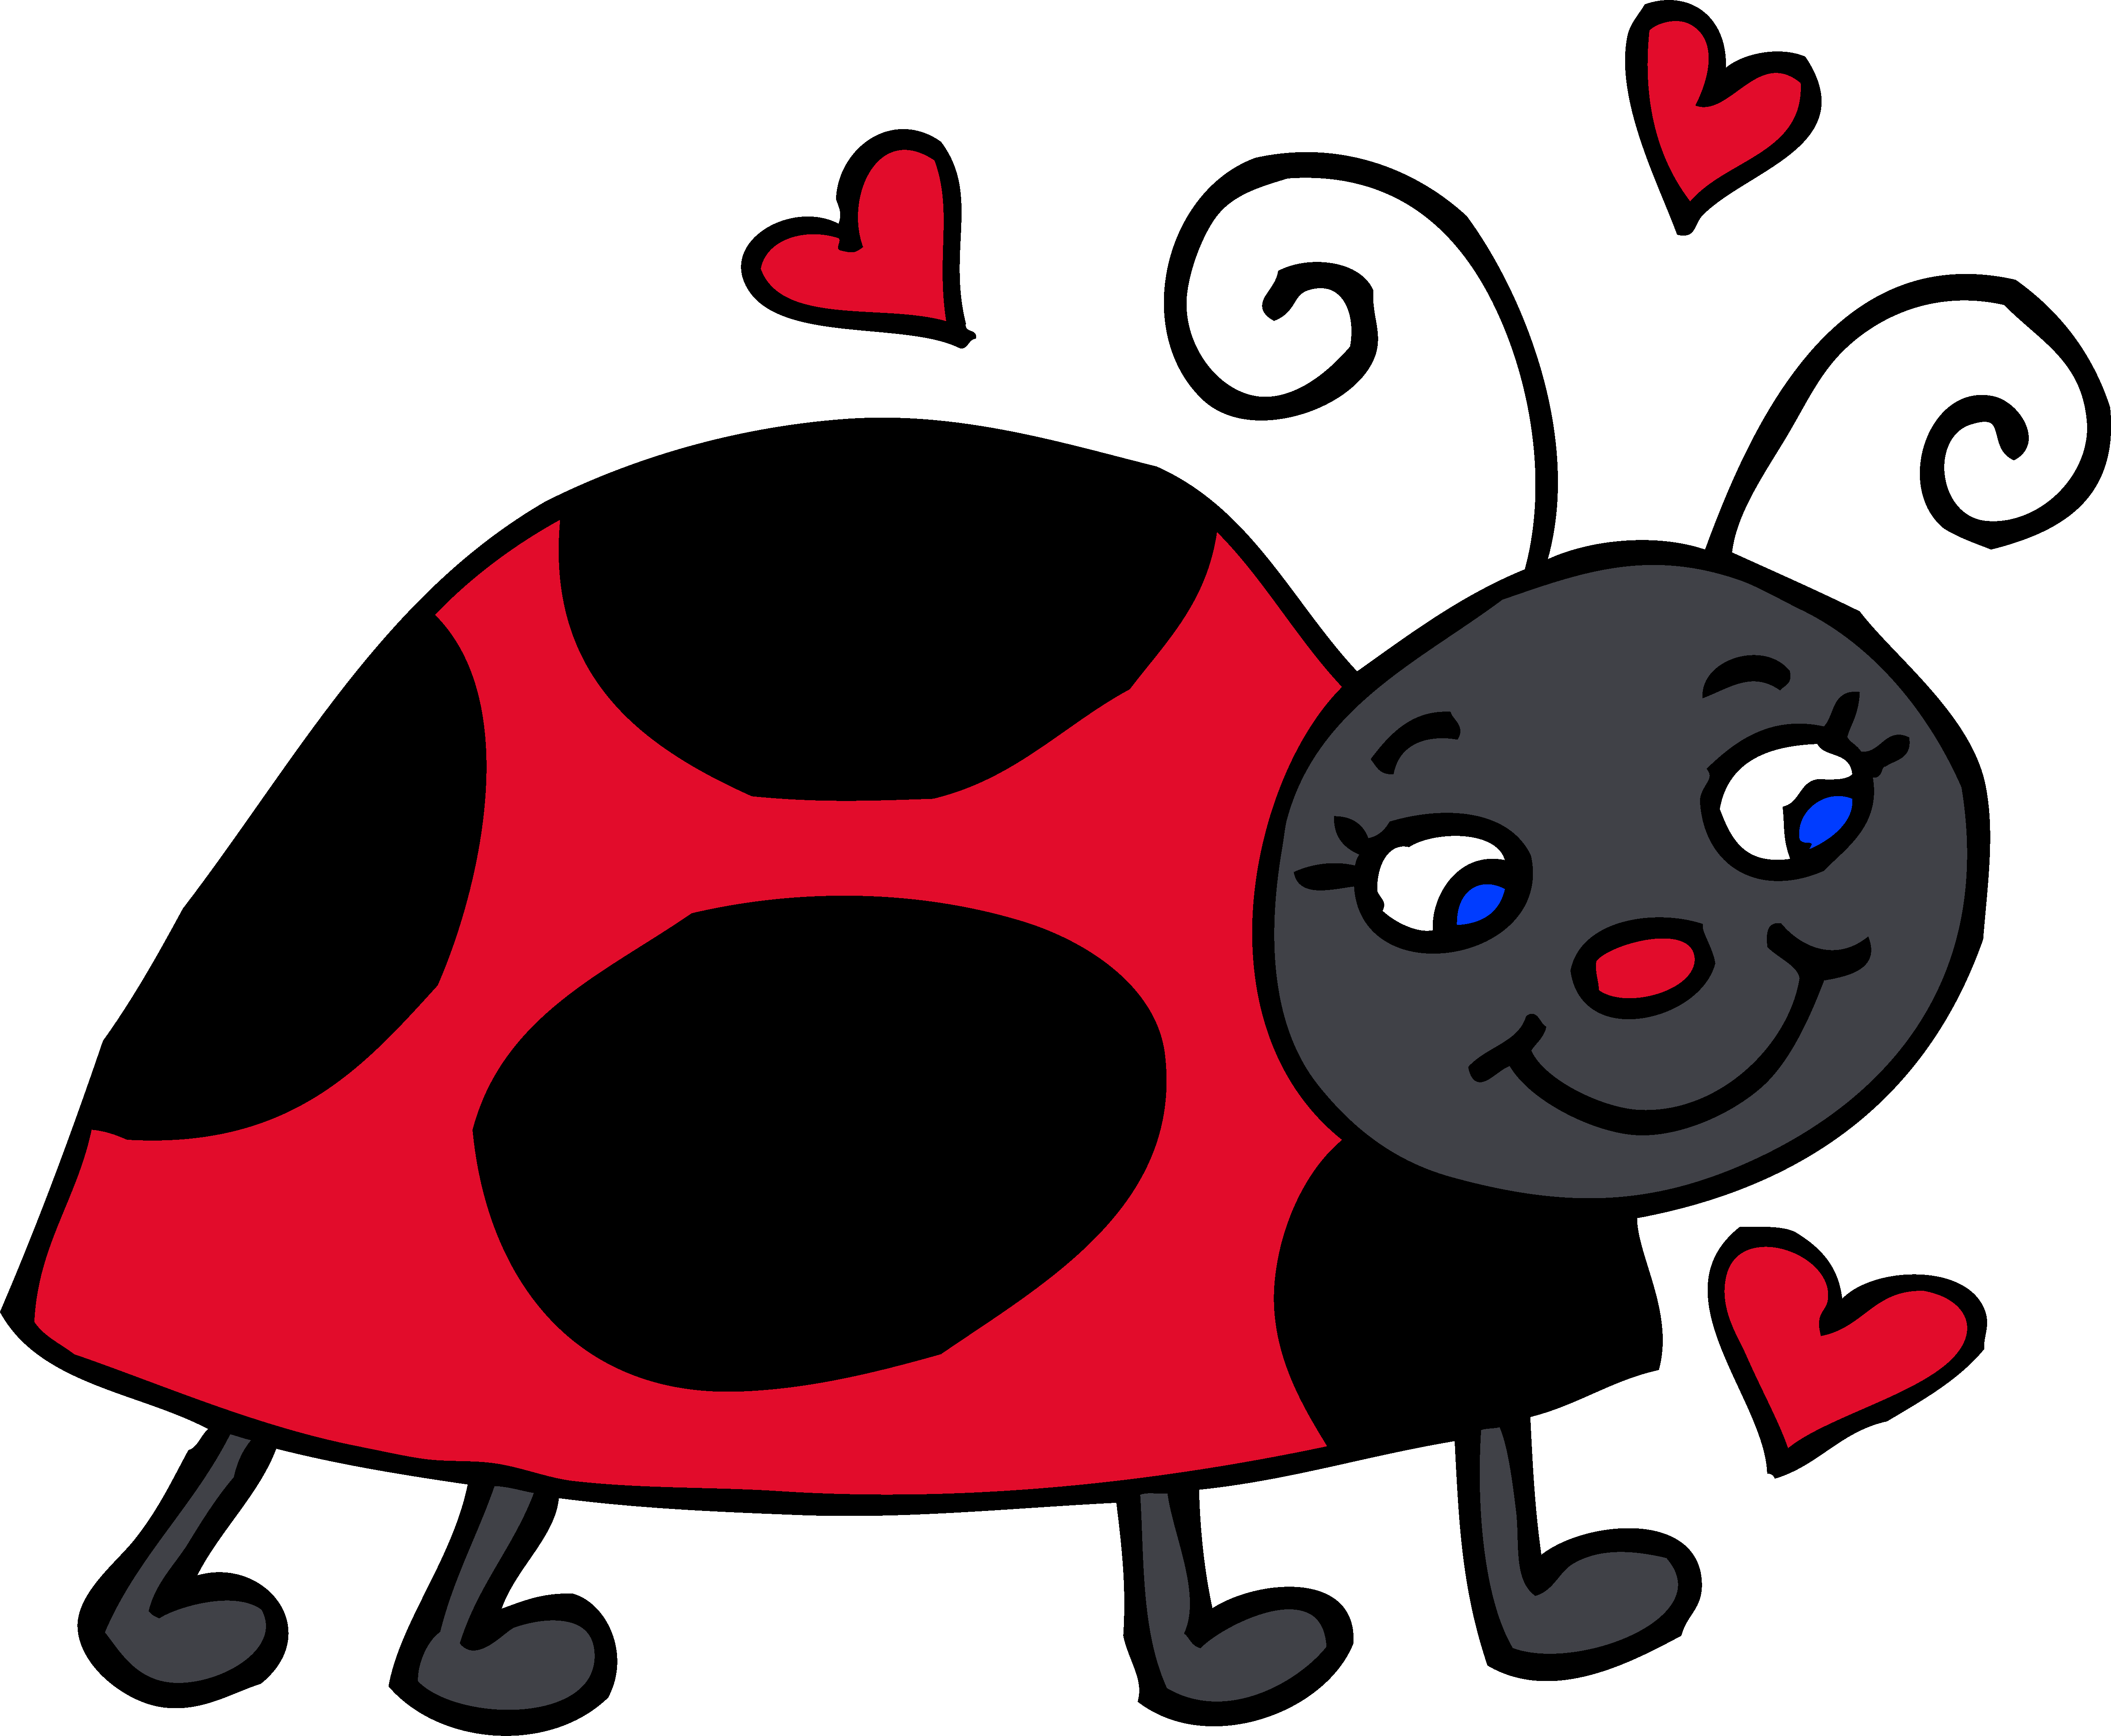 Clipart science red. Cute ladybug with hearts